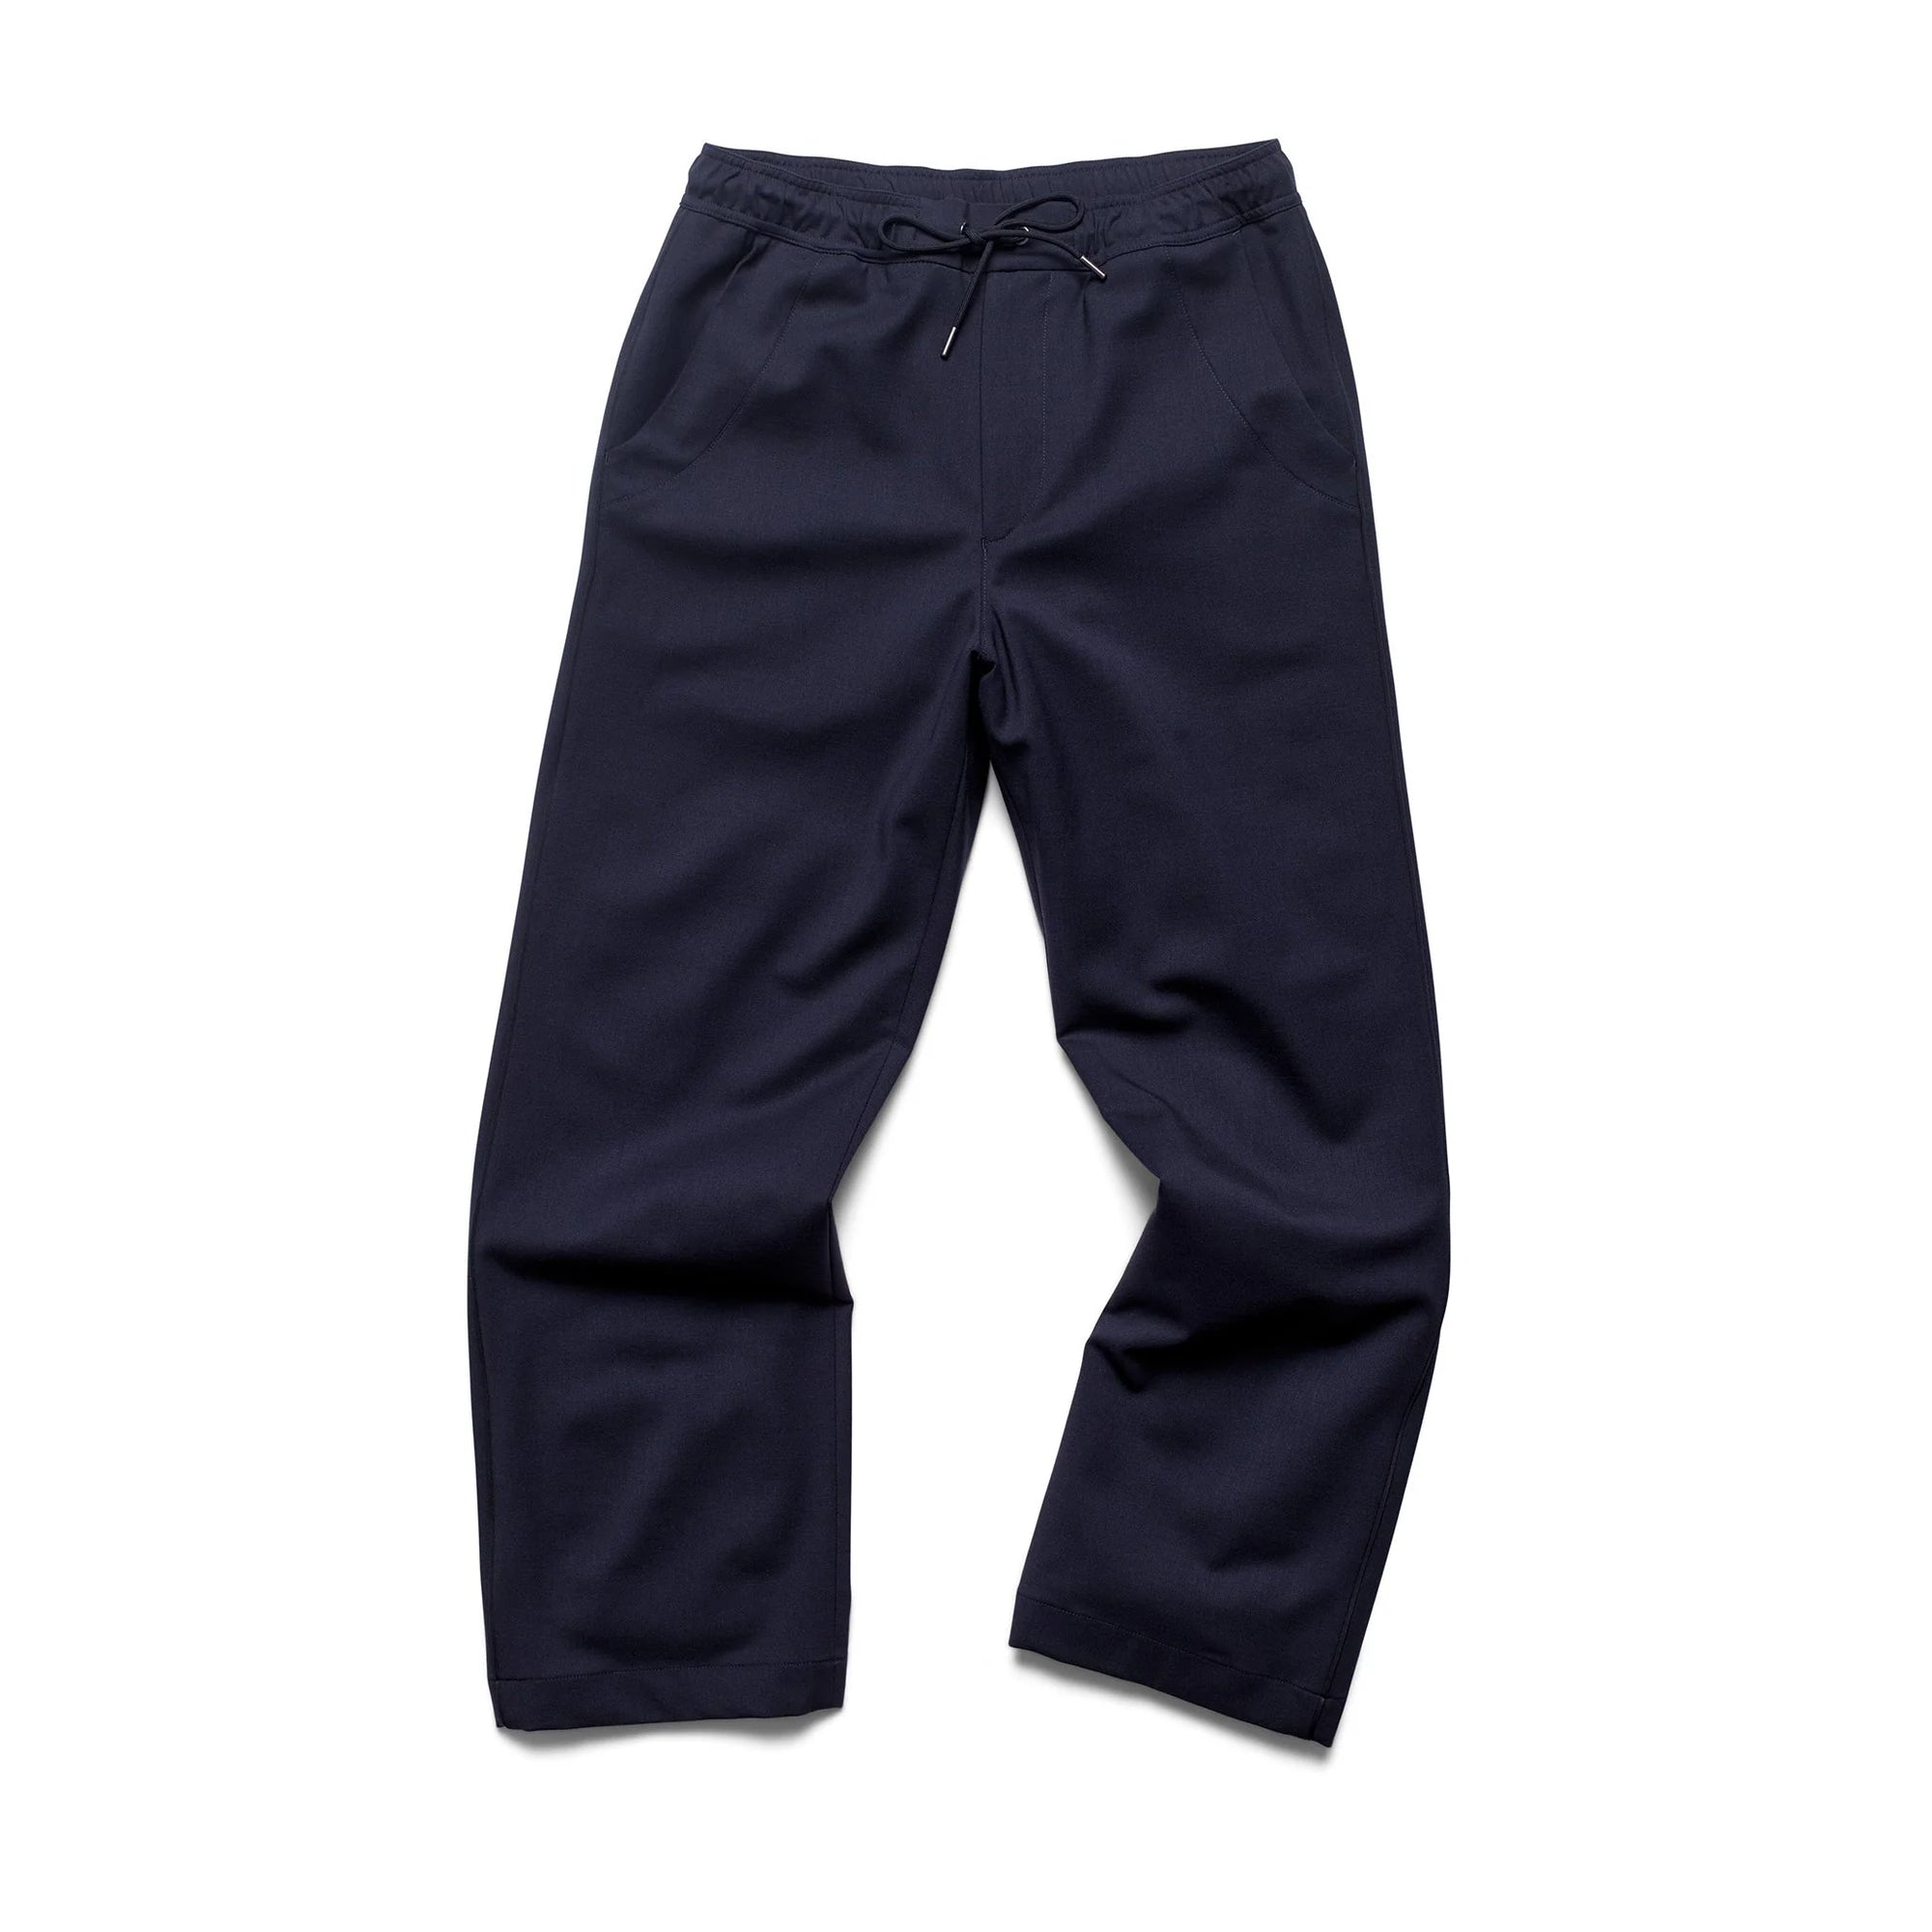 Reigning Champ Rugby Pant in Navy